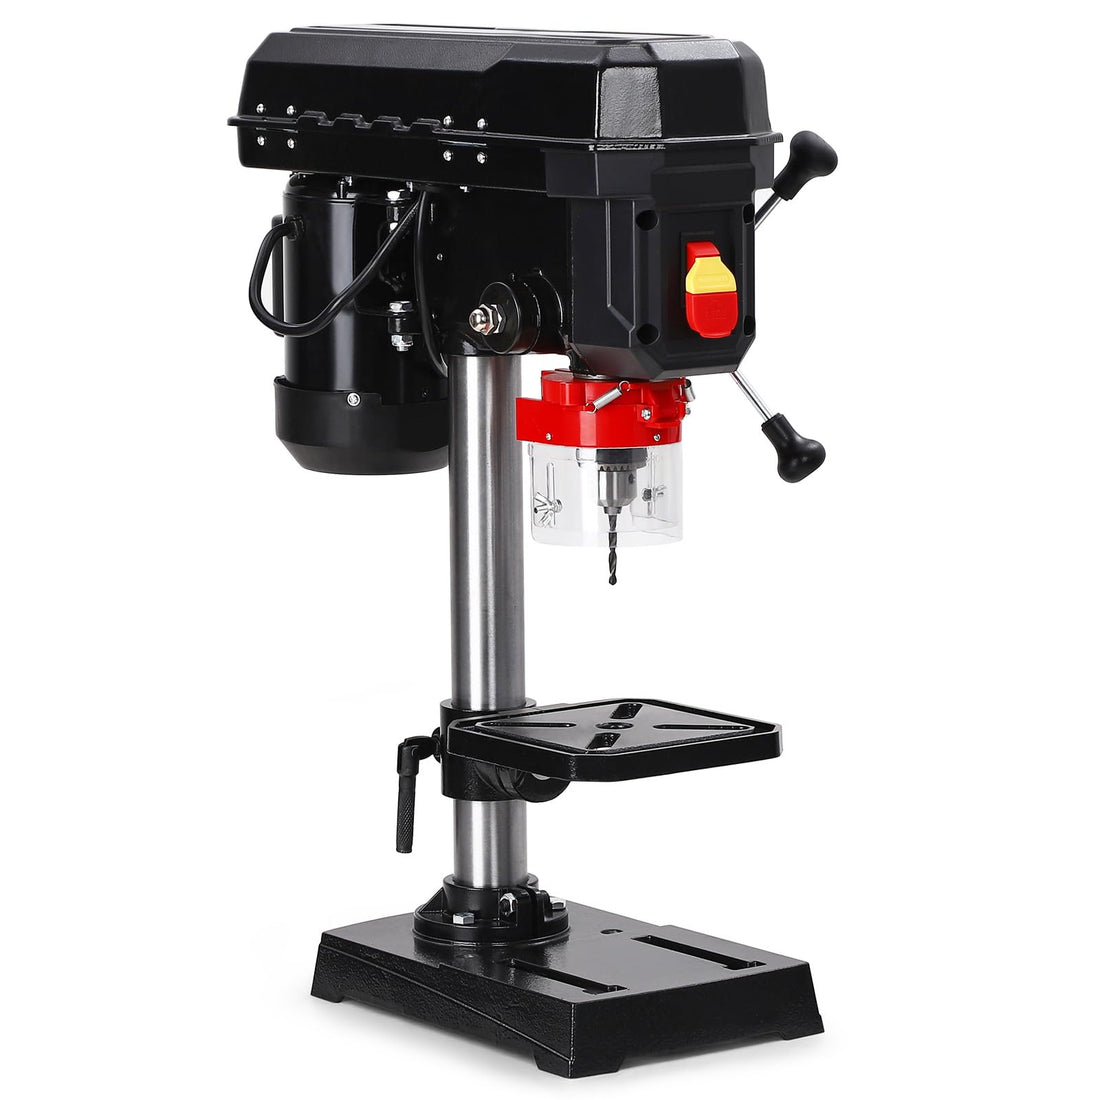 Benchtop Drill Press 2.5Amp 8 Inch Tiltling Tabletop Drilling Machine for Wood